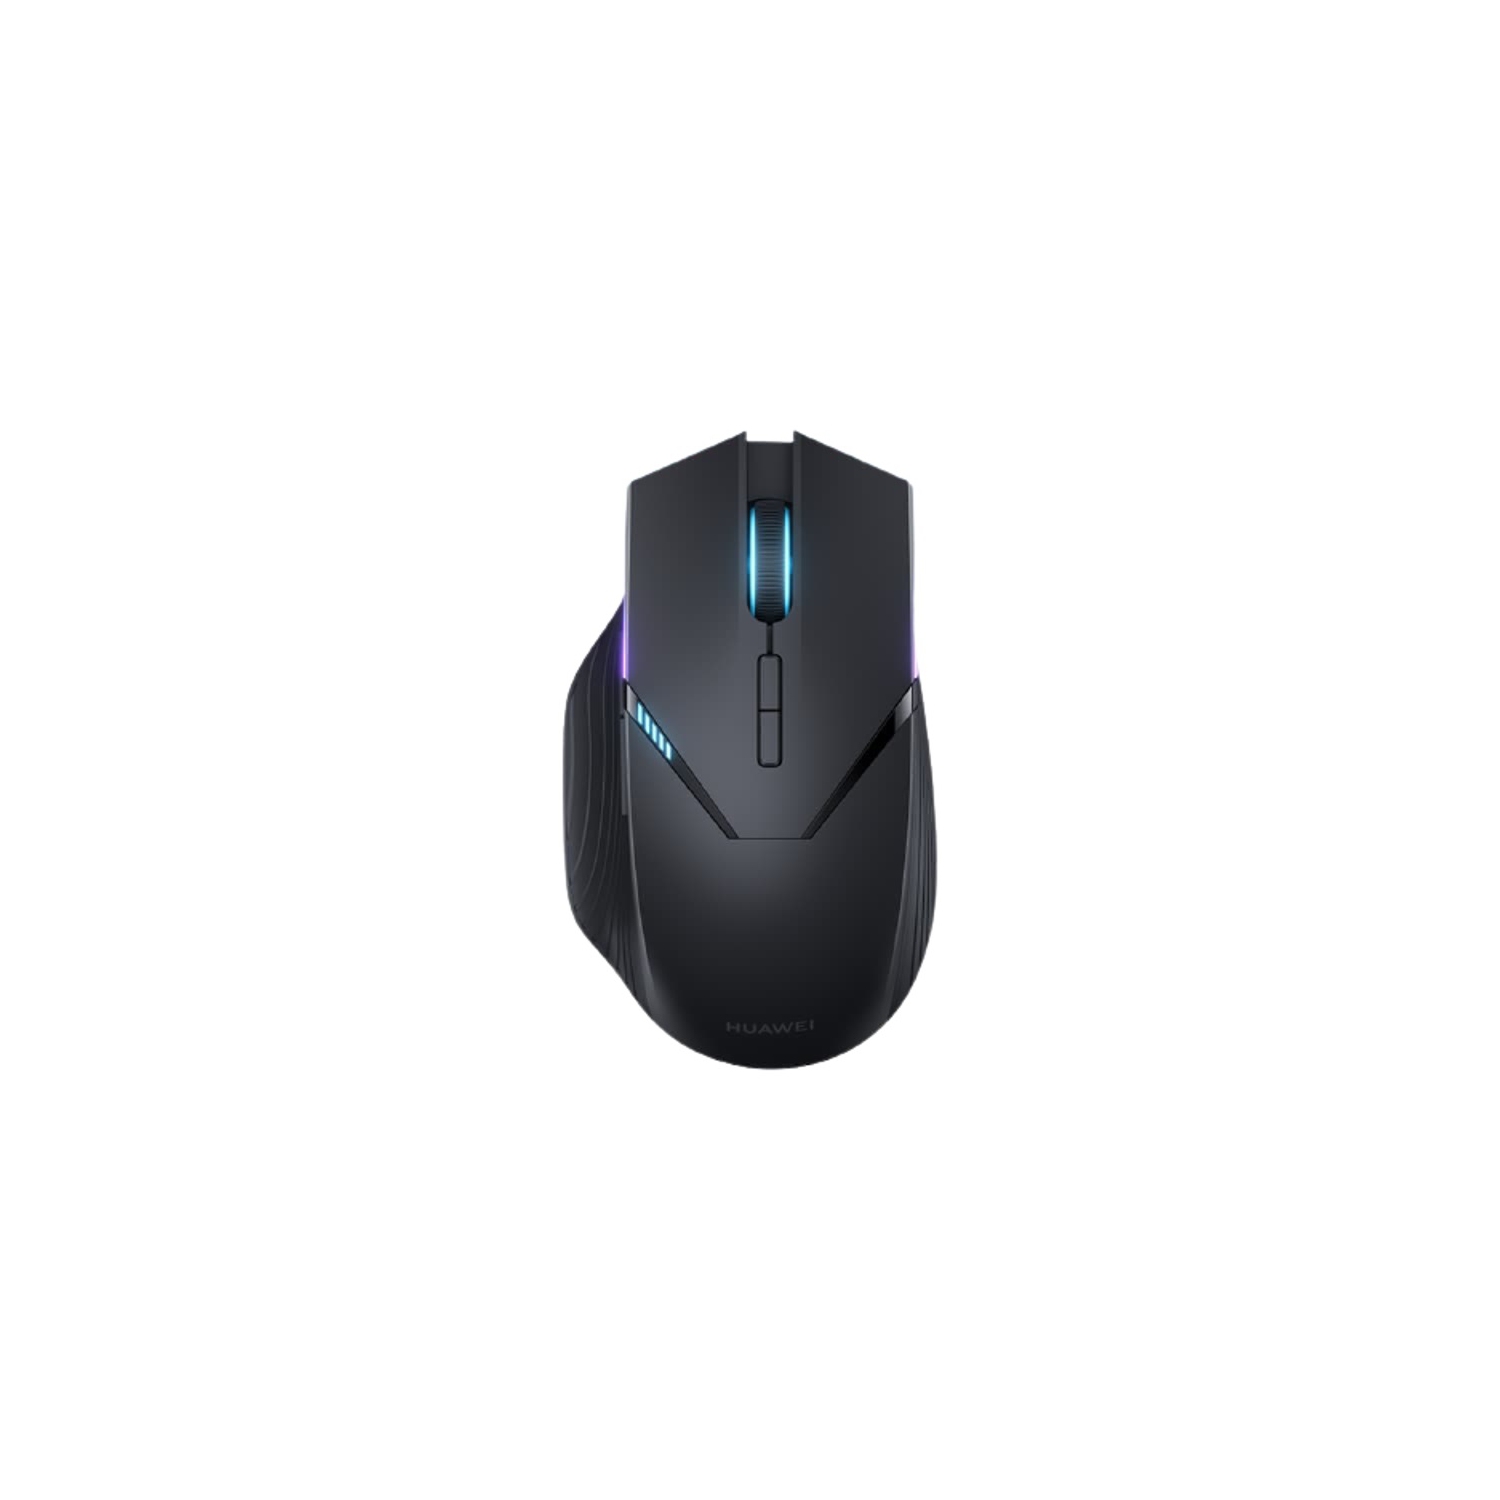 HUAWEI Wireless Mouse GT - 2.4G Wireless/Bluetooth/Wired Connections, Fast Charging, Durable Battery, 16,000 DPI, 1000 Hz, RGB, 7 Programmable Buttons, eSports-Level Performance